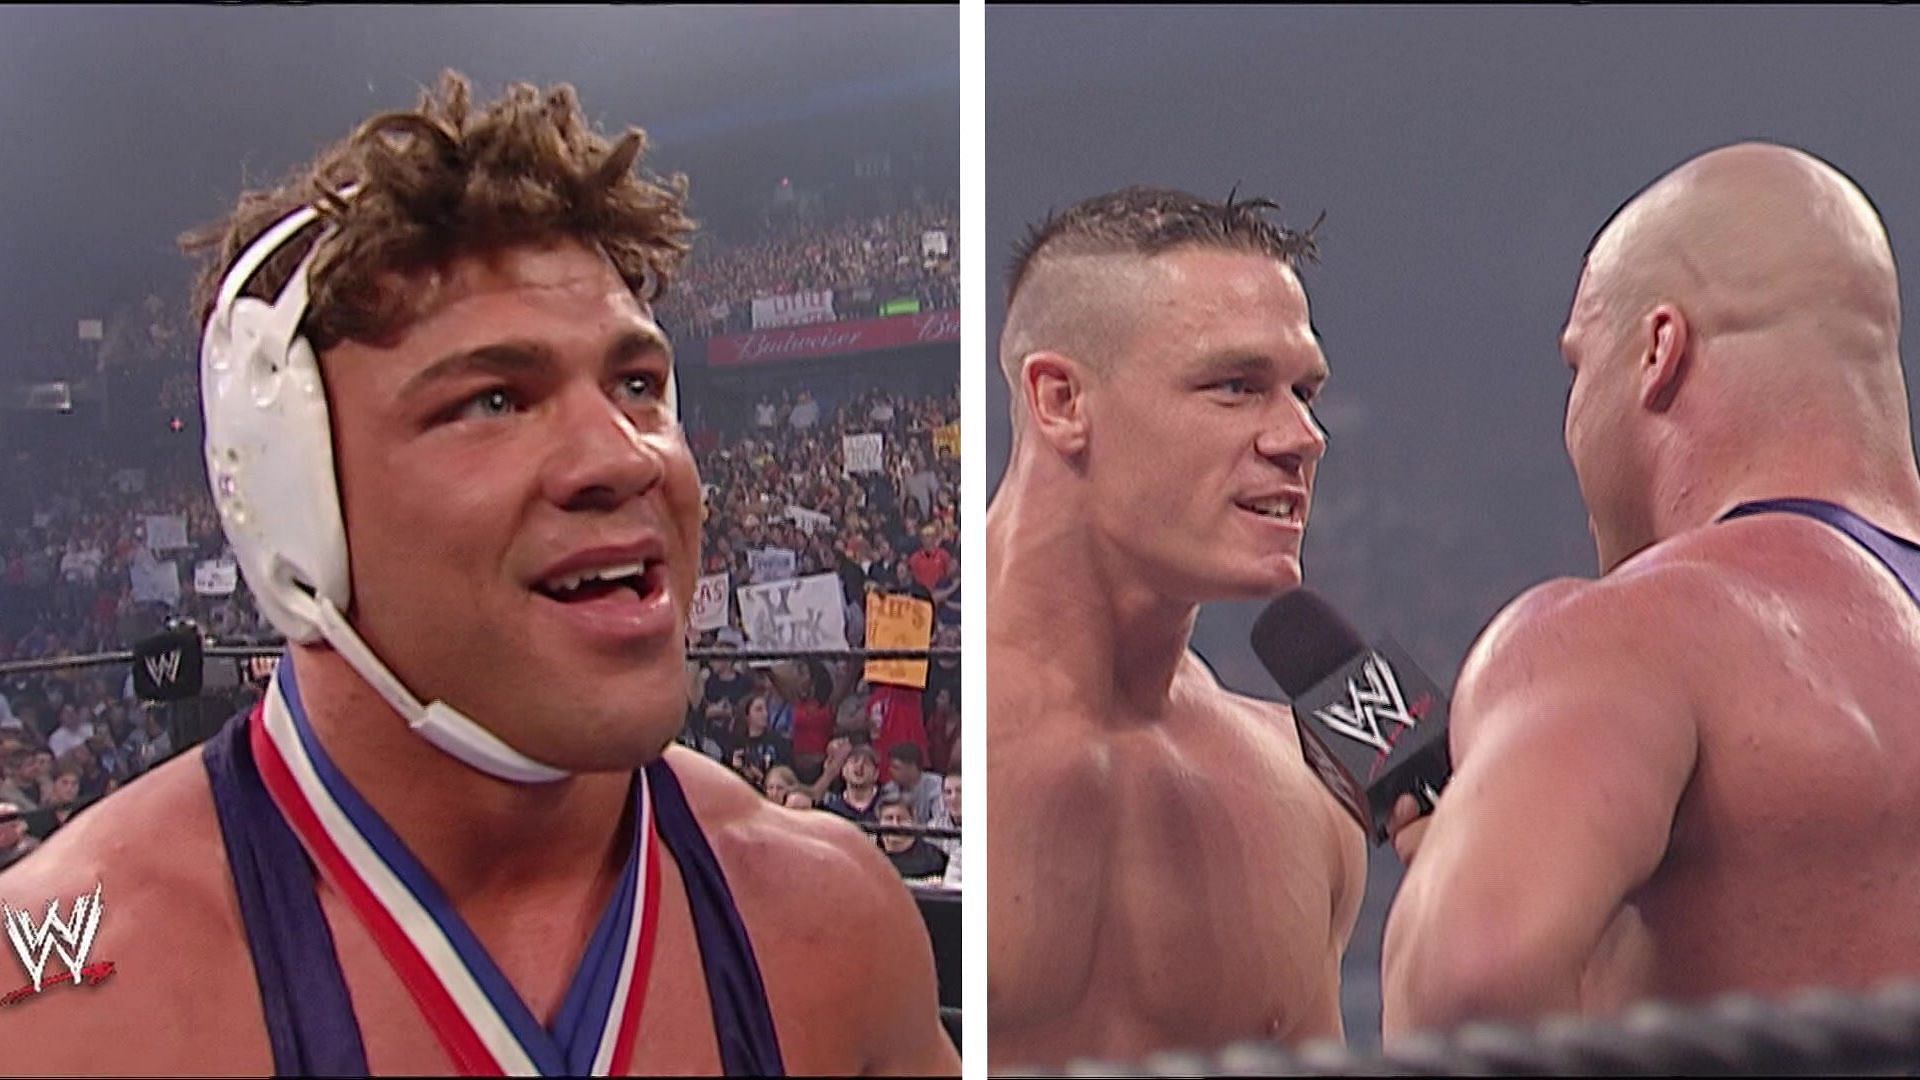 Kurt Angle made a challenge on this day in history